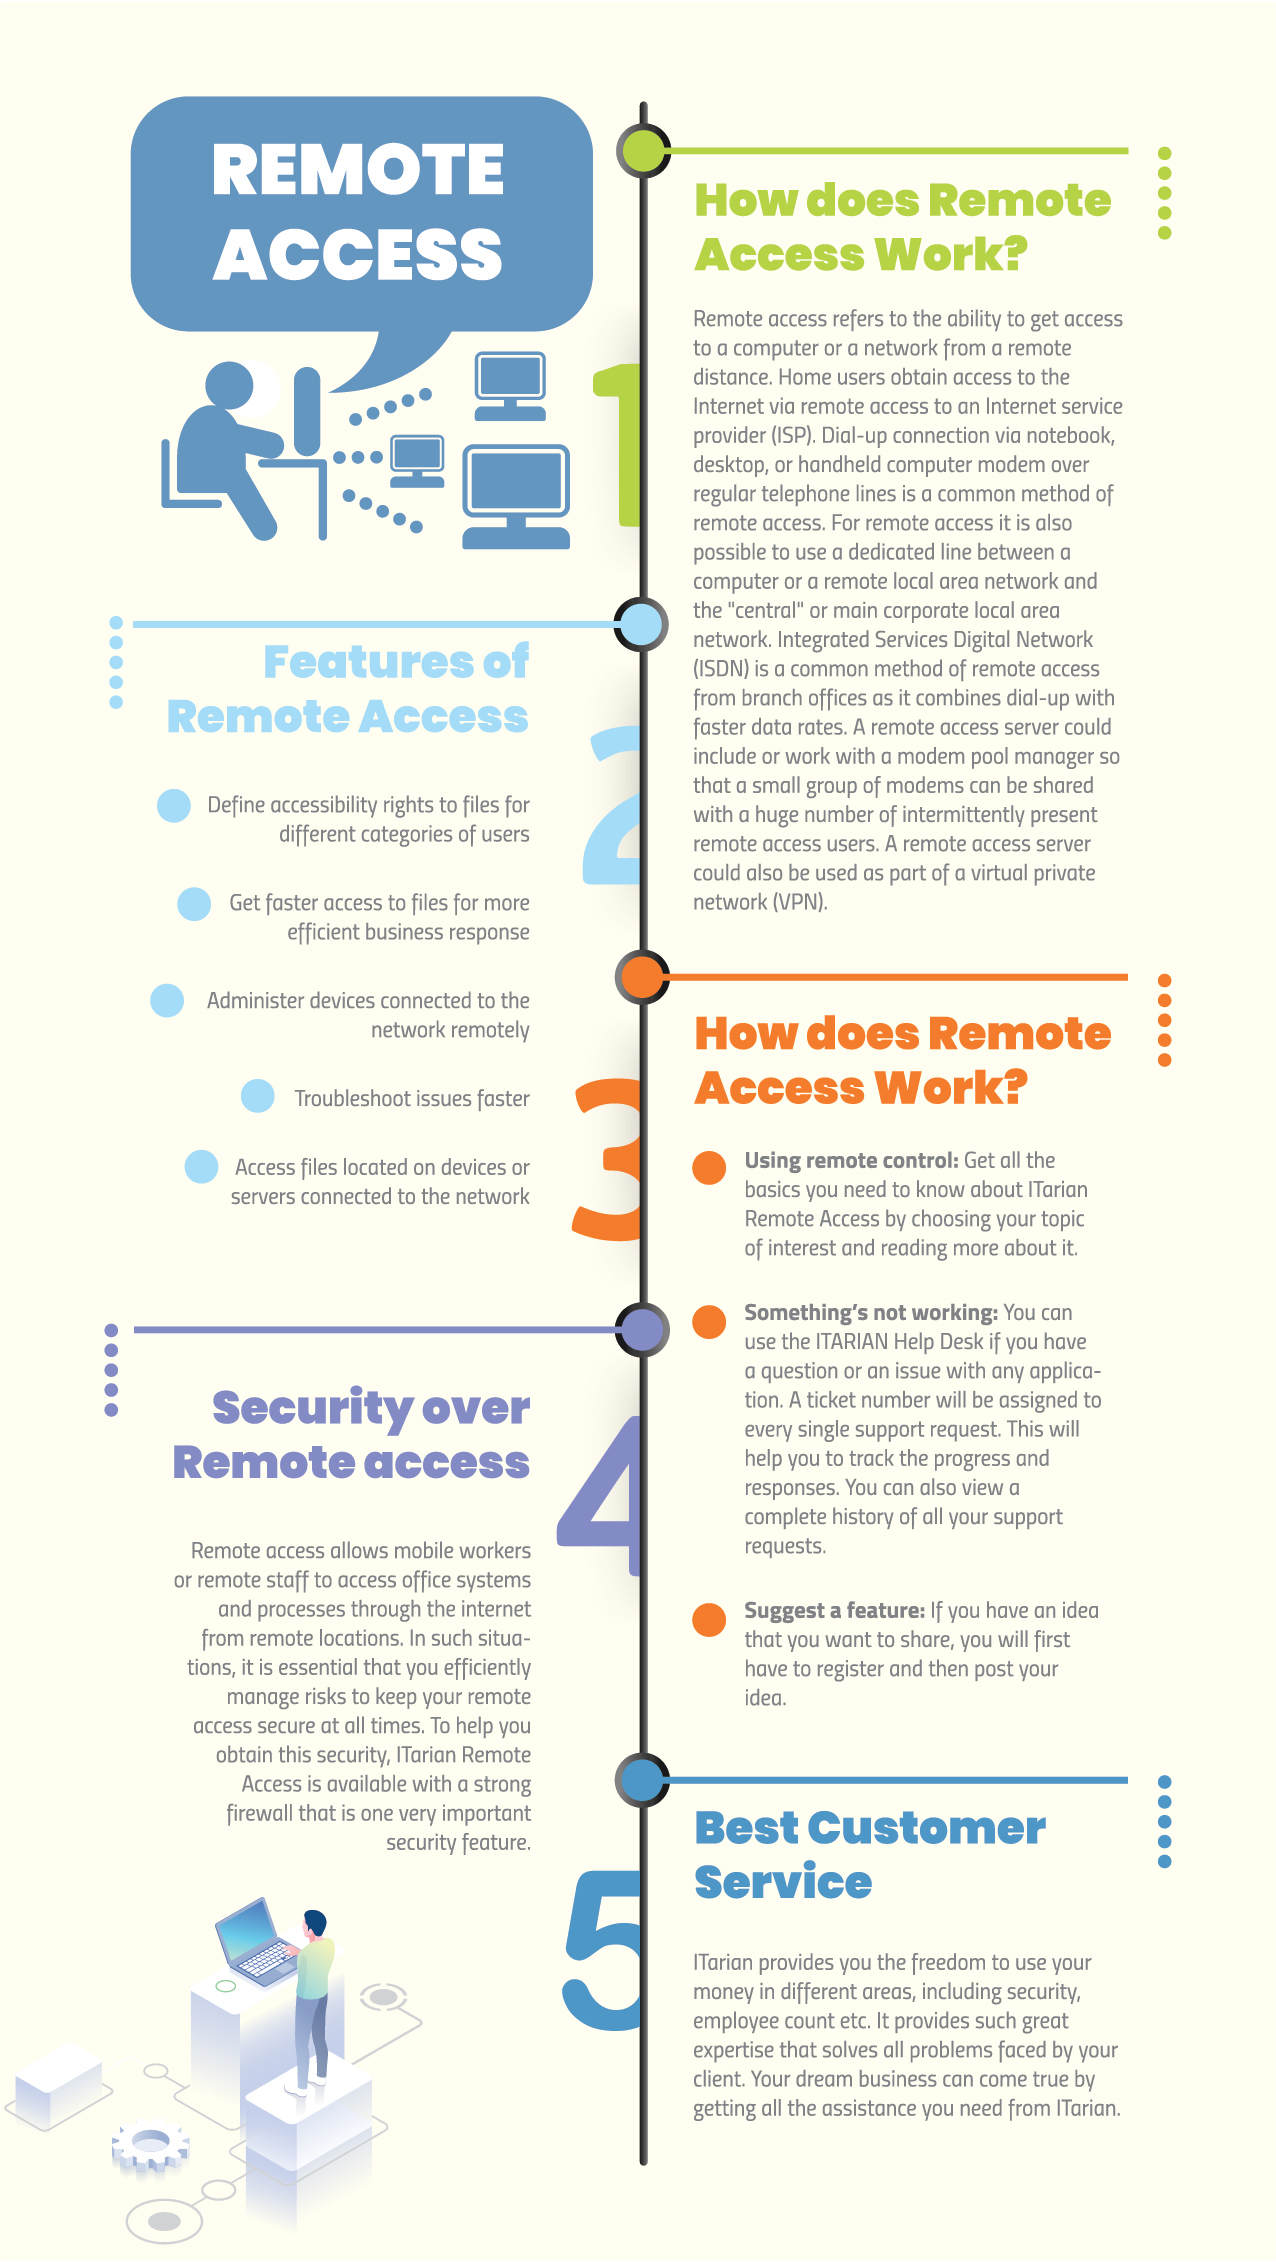 How does Remote Access Work?